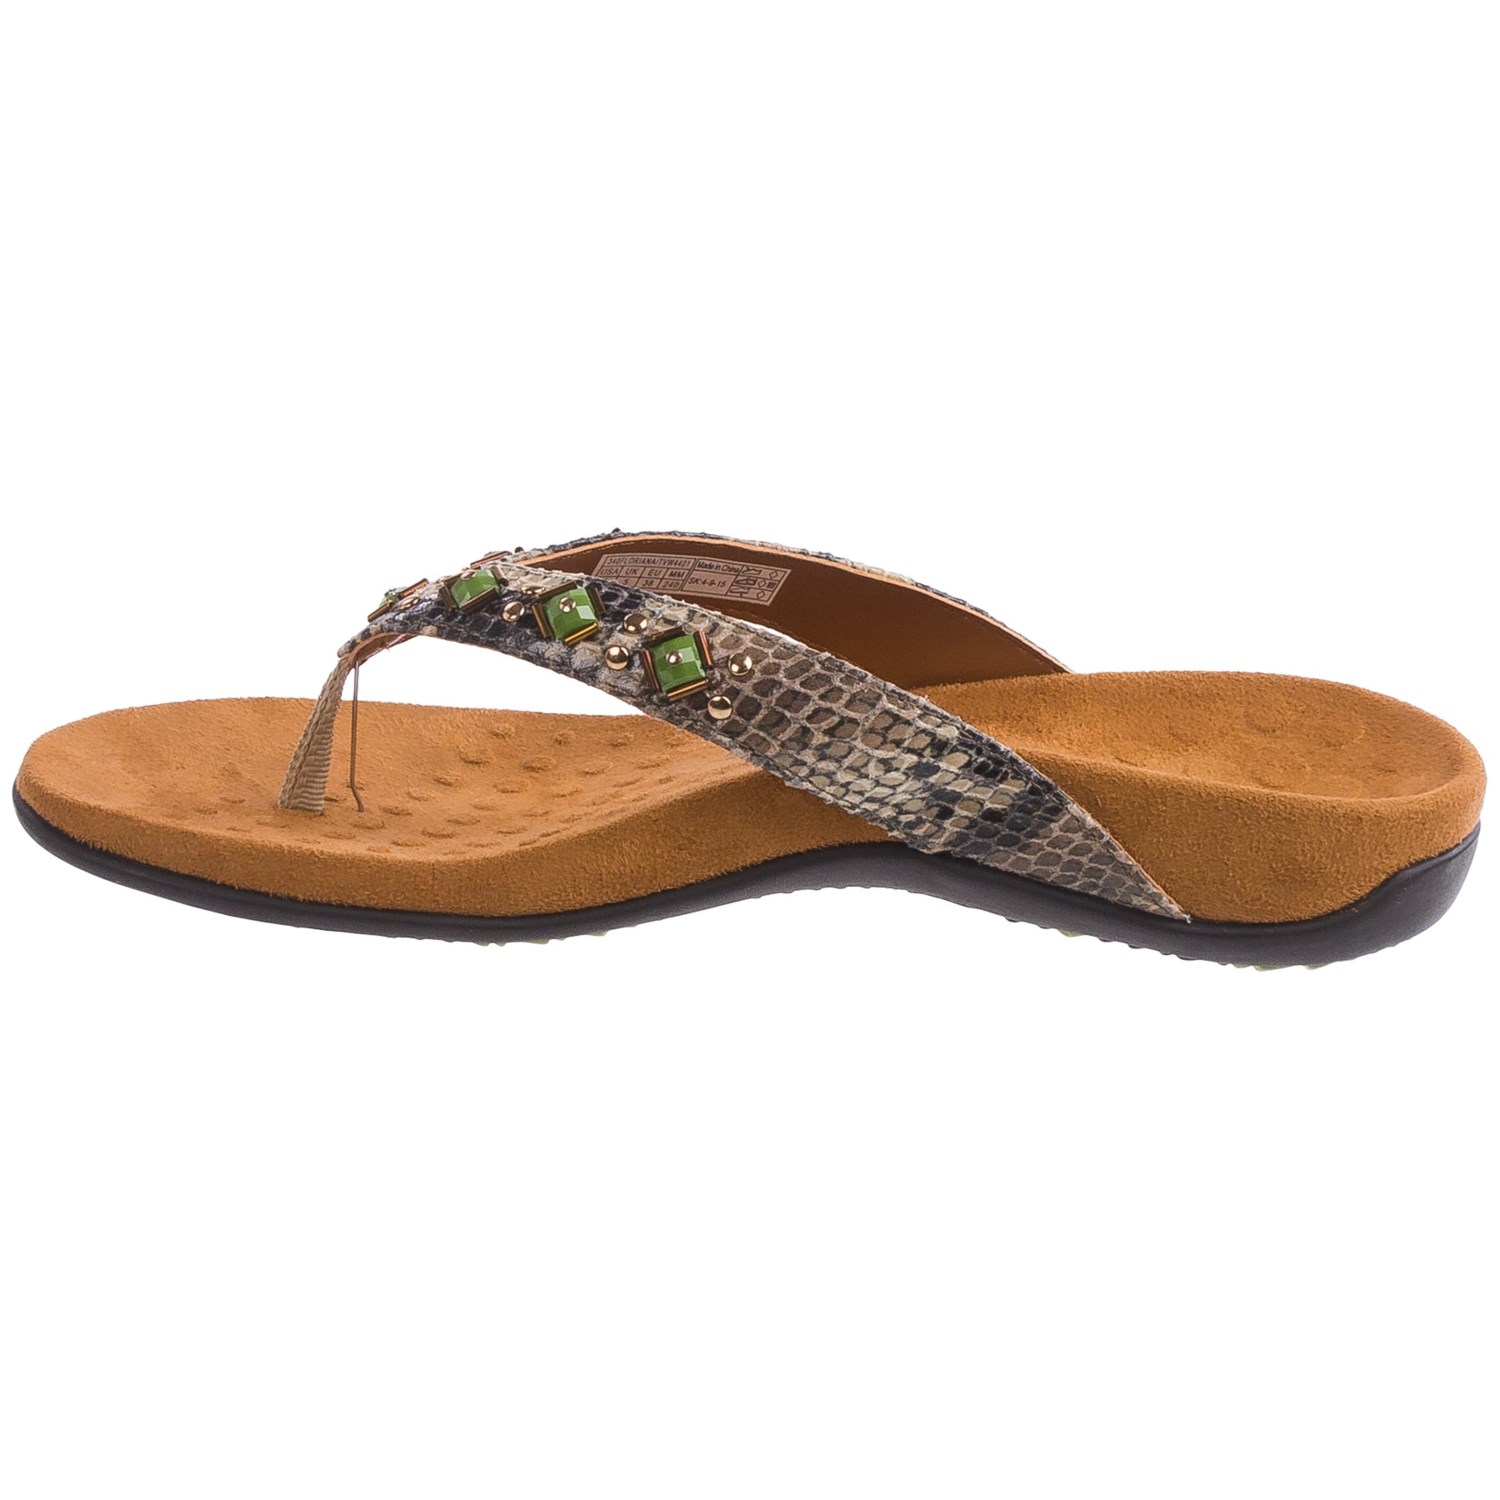 Vionic with Orthaheel Technology Floriana Sandals (For Women) - Save 49%